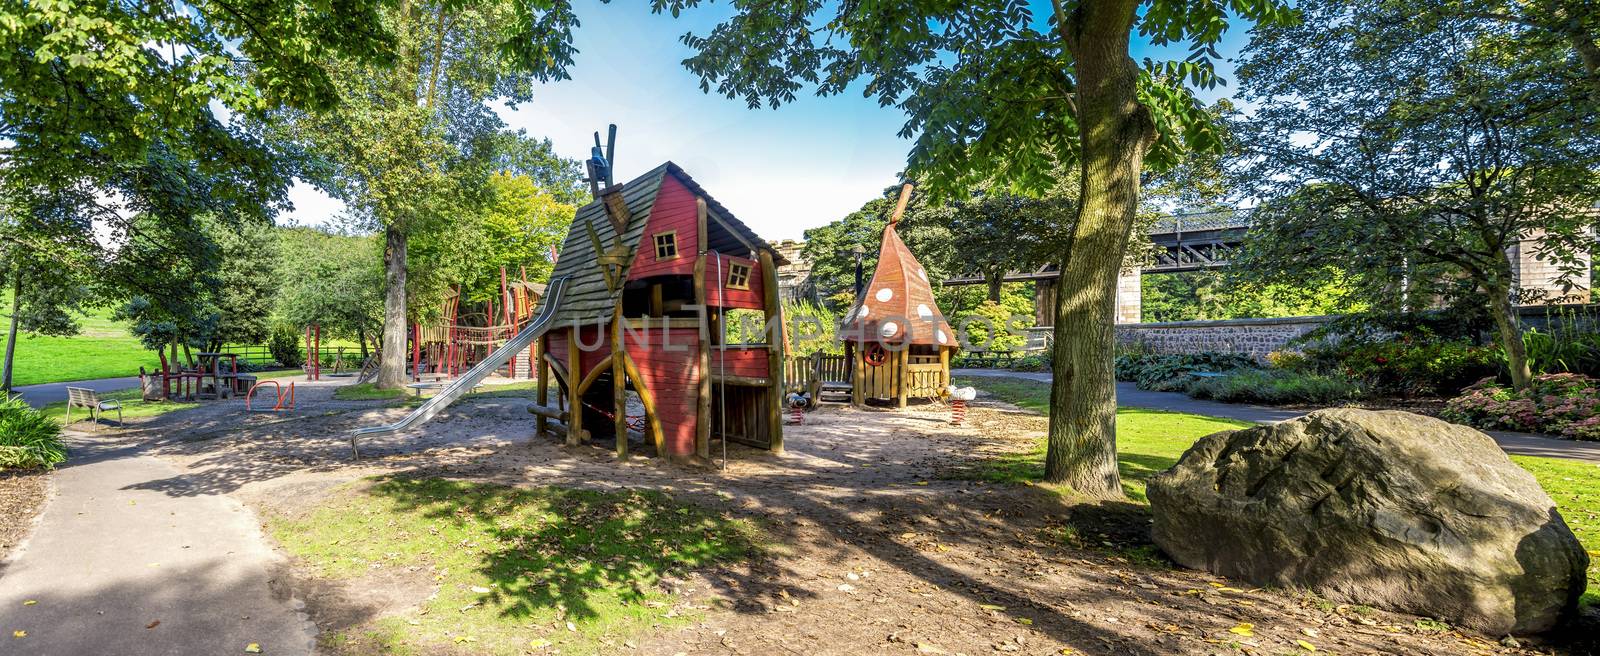 Panoramic view of wooden playground with magic houses and slides, Duthie park, Aberdeen, Scotland by anastasstyles